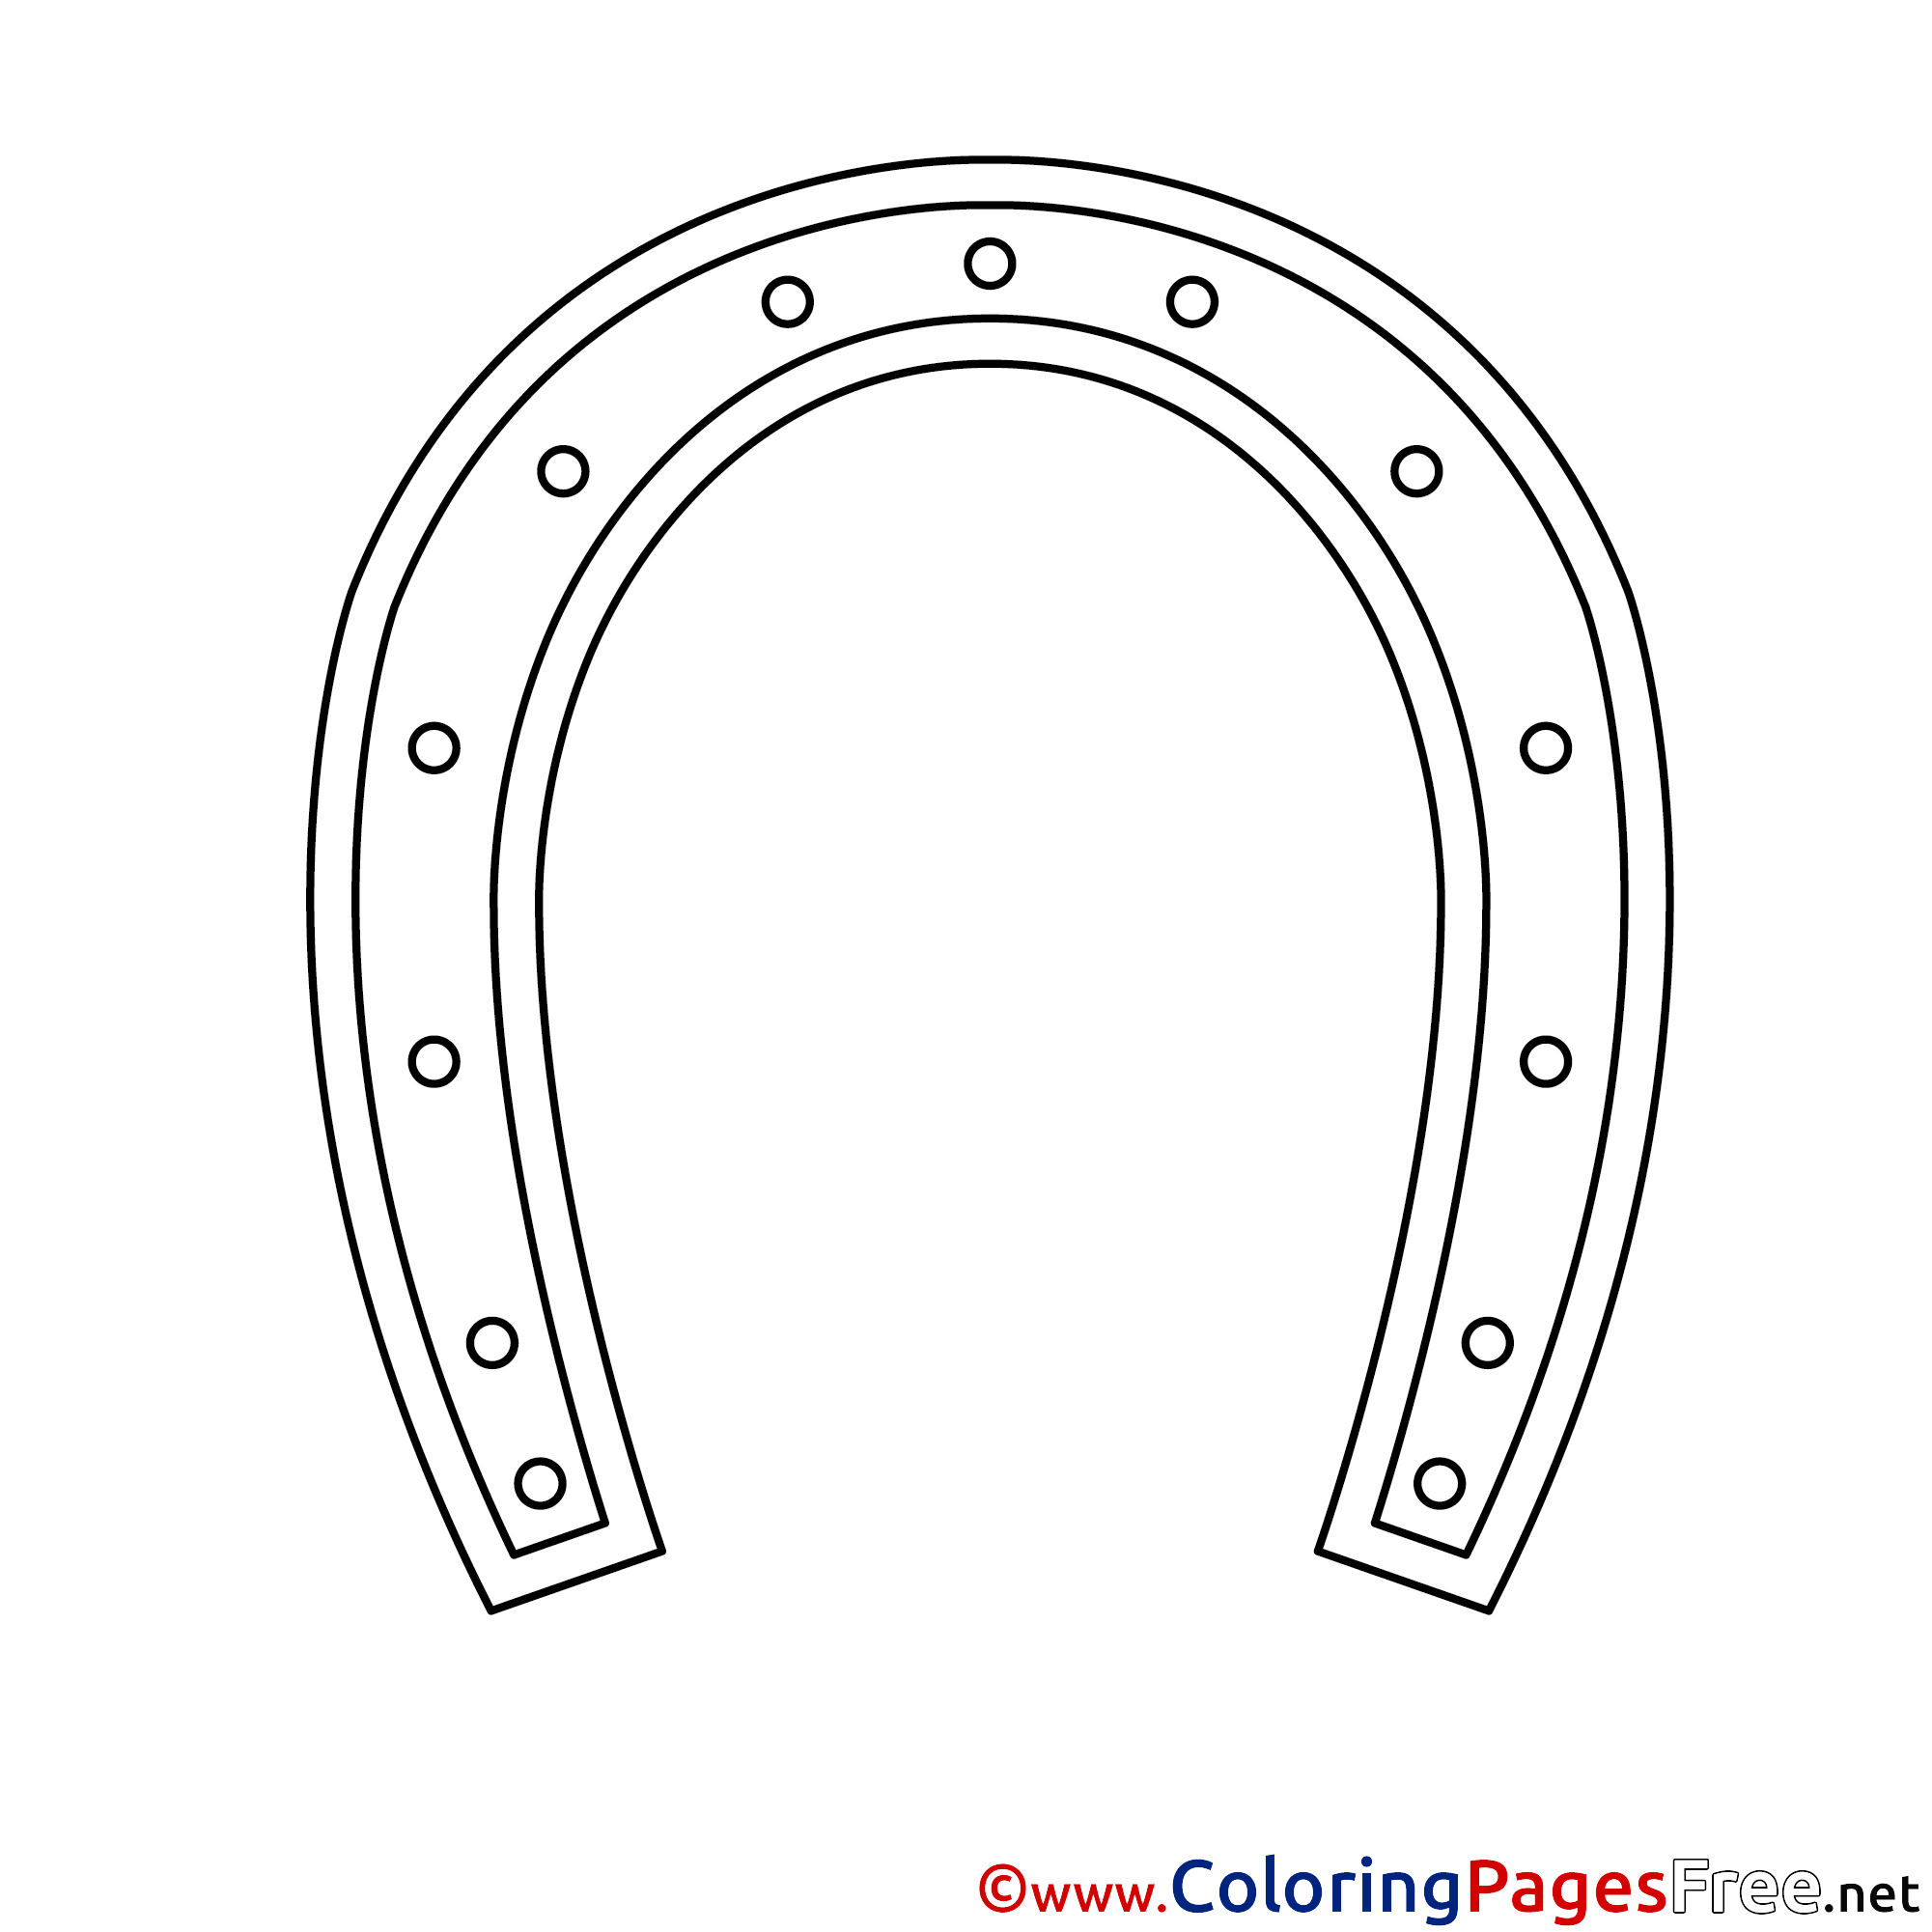 free-coloring-pages-of-horseshoes